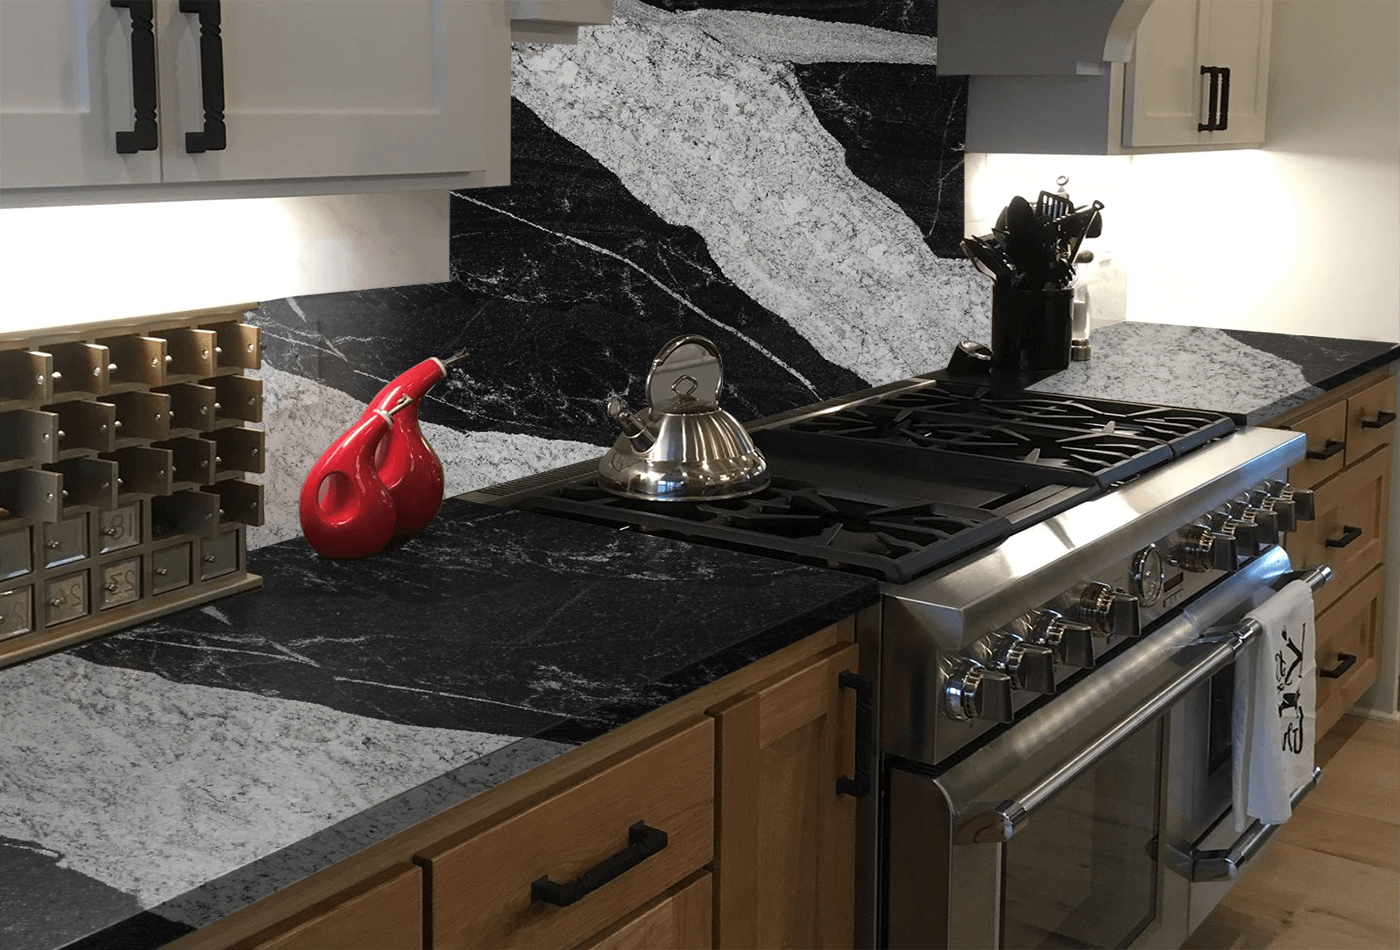 From Leather Finished Granite to Brushed, Our Fabricators Do It All